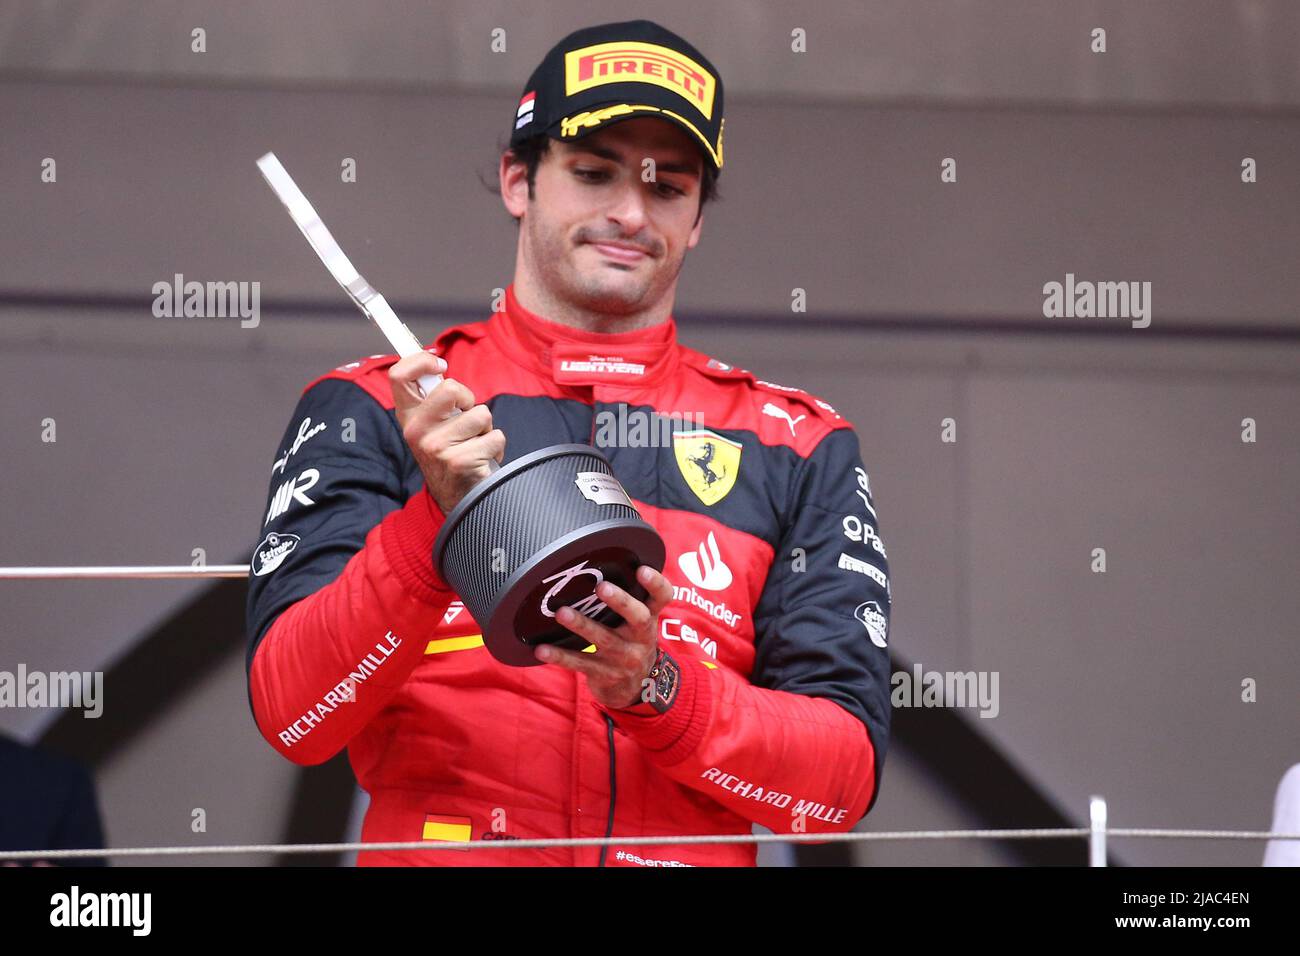 Carlos sainz hi-res stock photography and images - Alamy